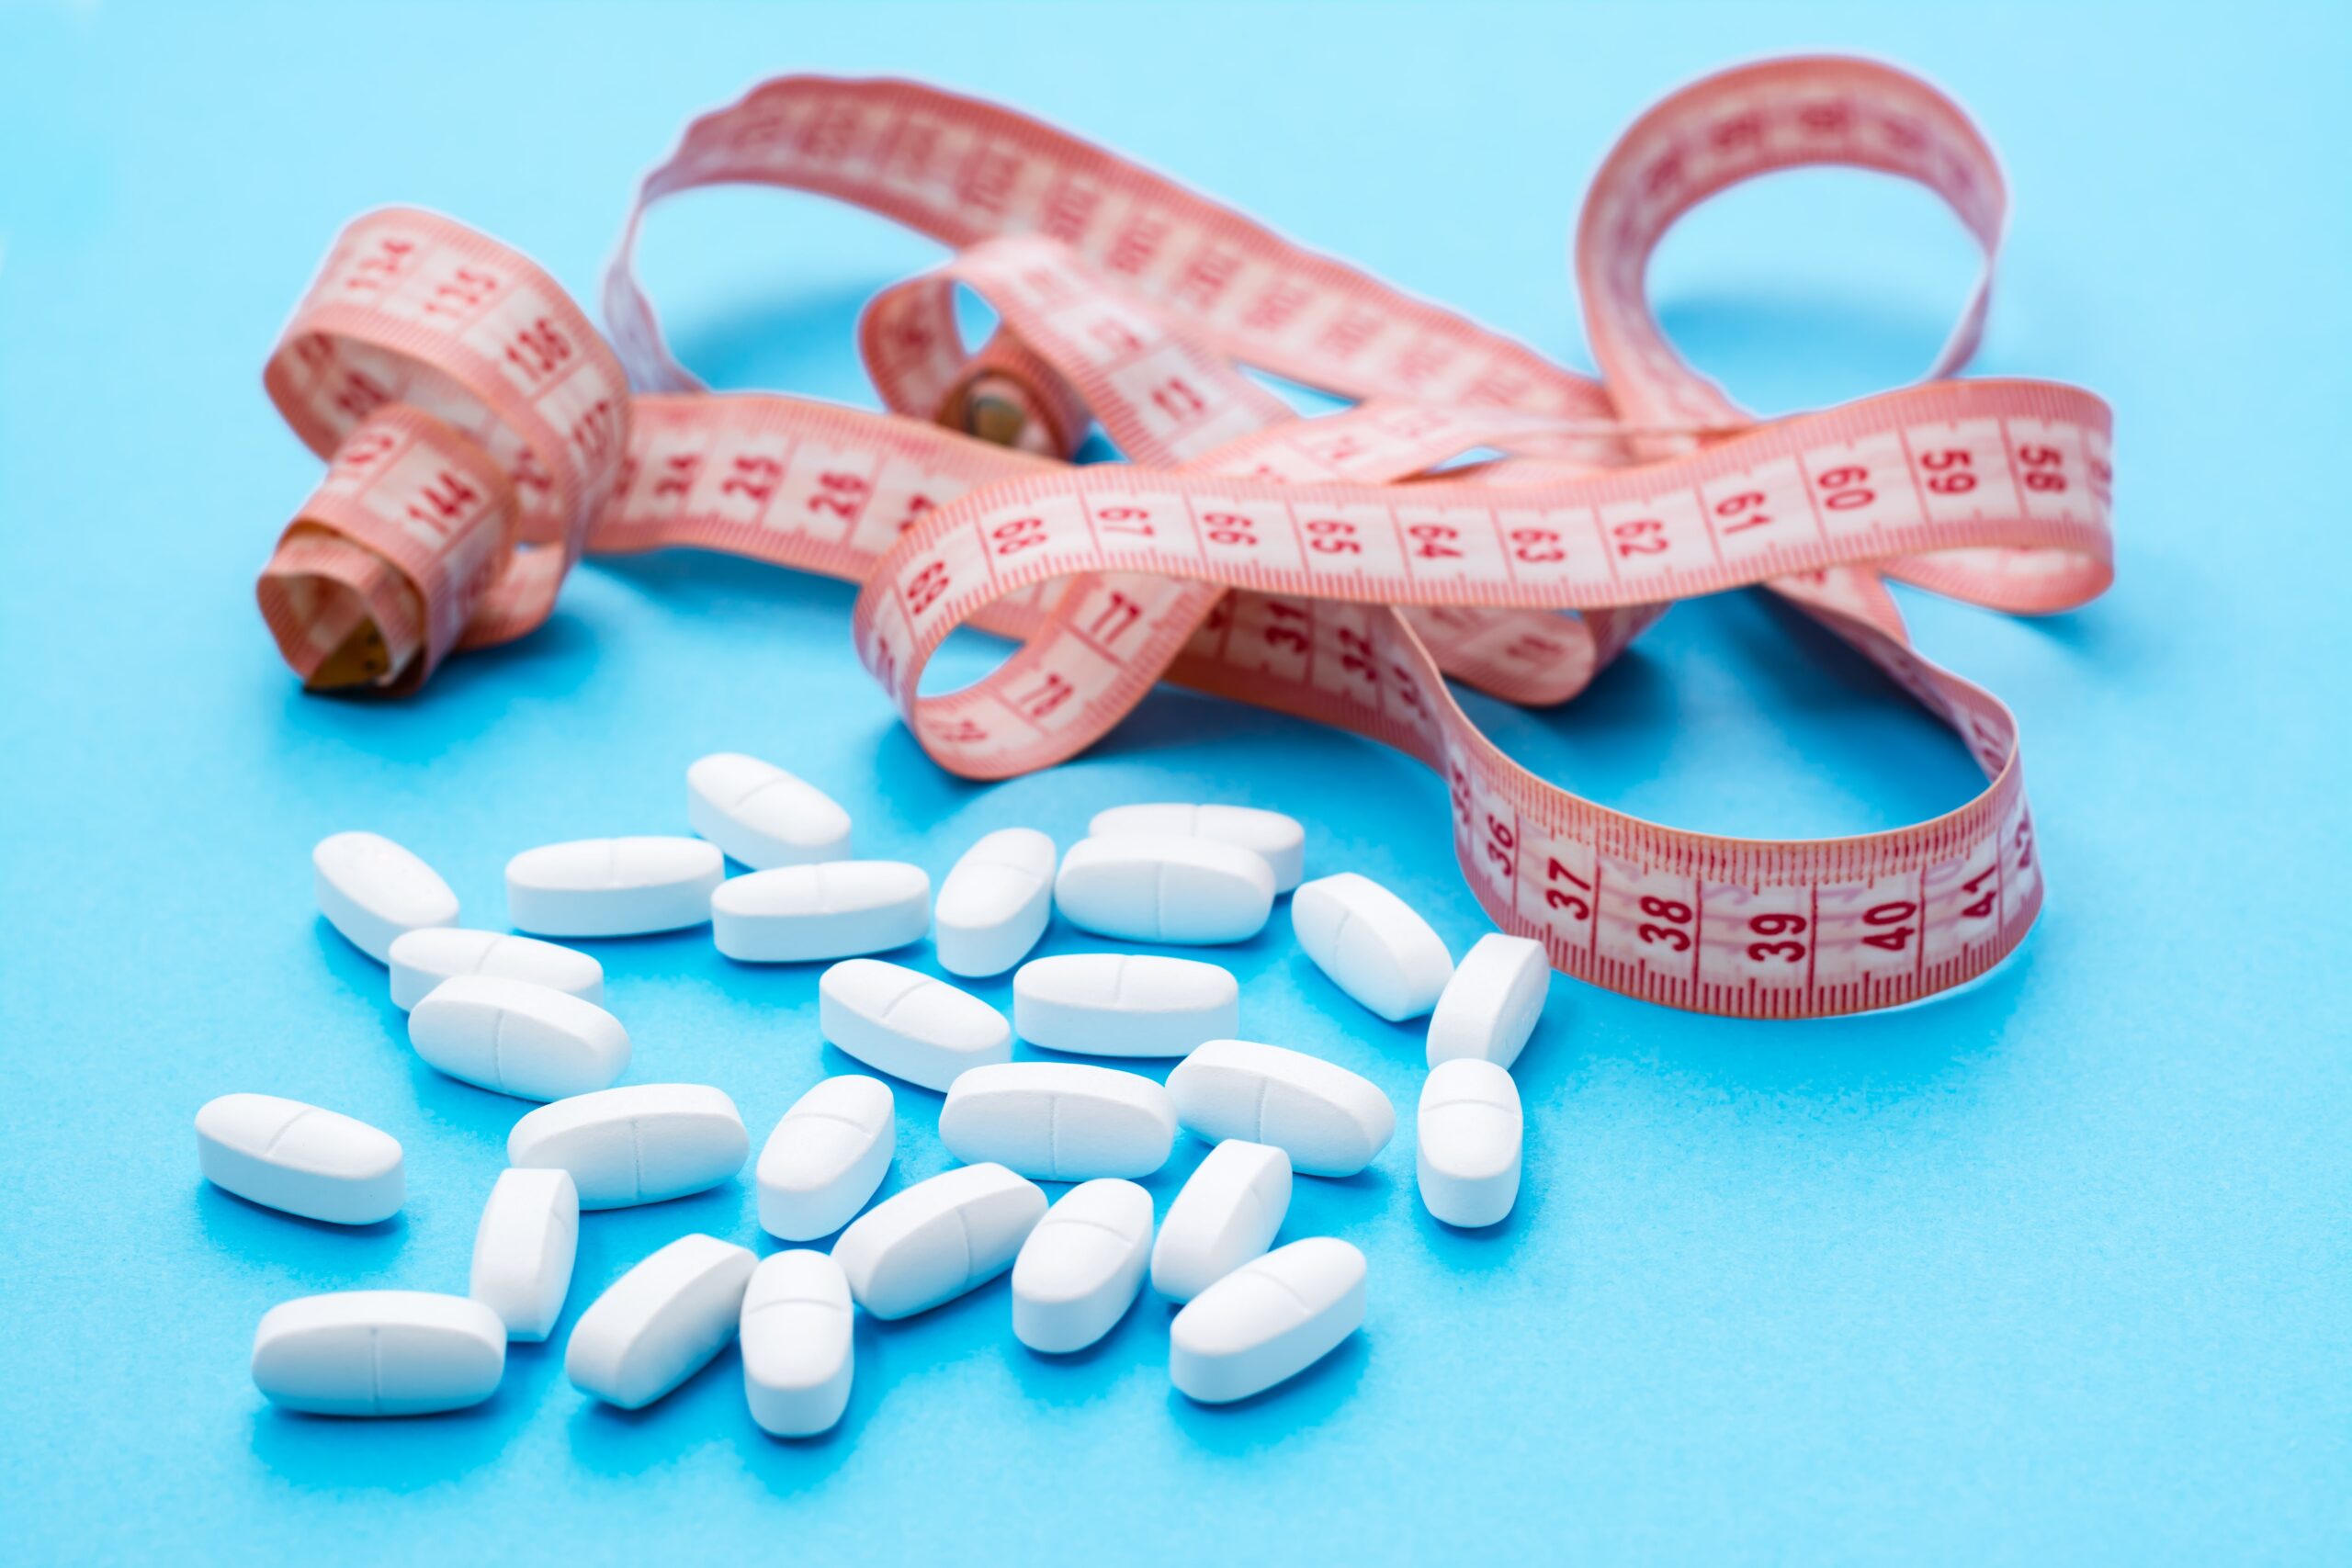 Can Metformin Help You Lose Weight?